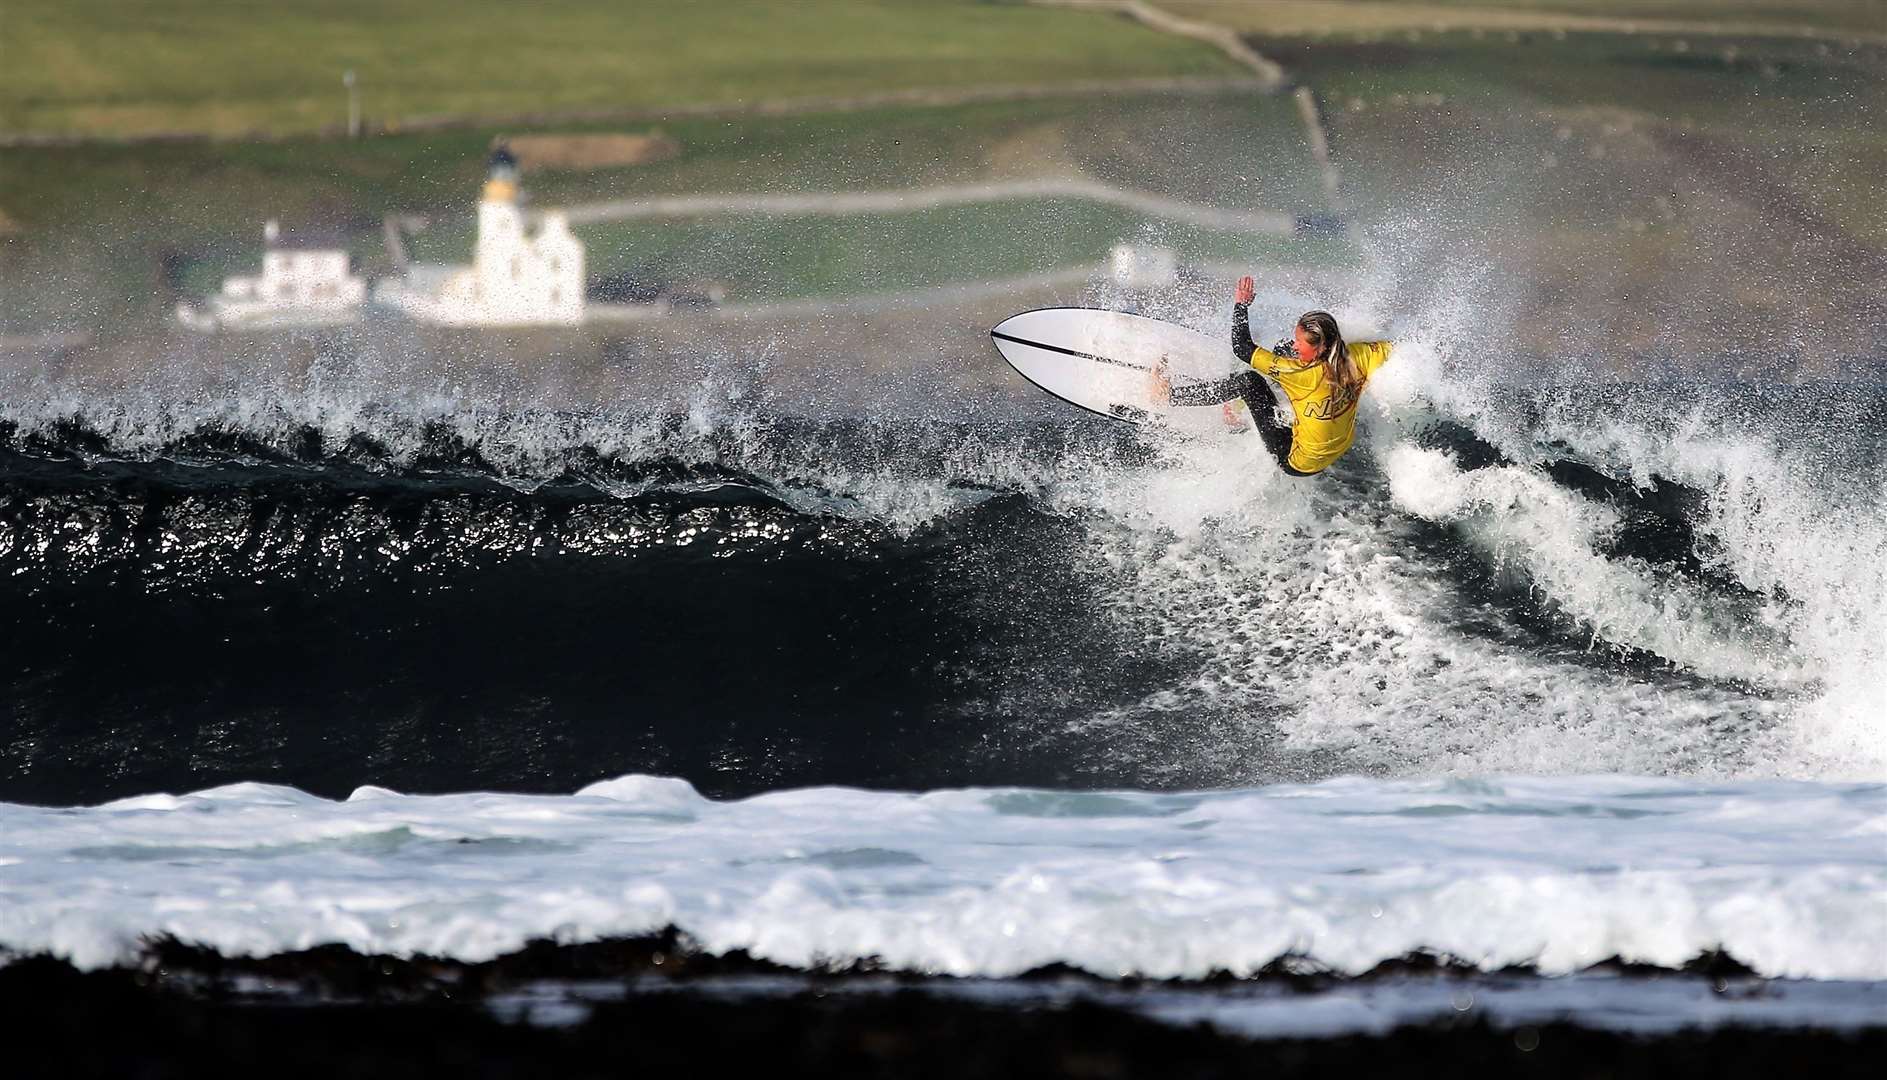 Wave Rider picture taken by James Gunn at Thurso which received recognition in a major UK national competition.